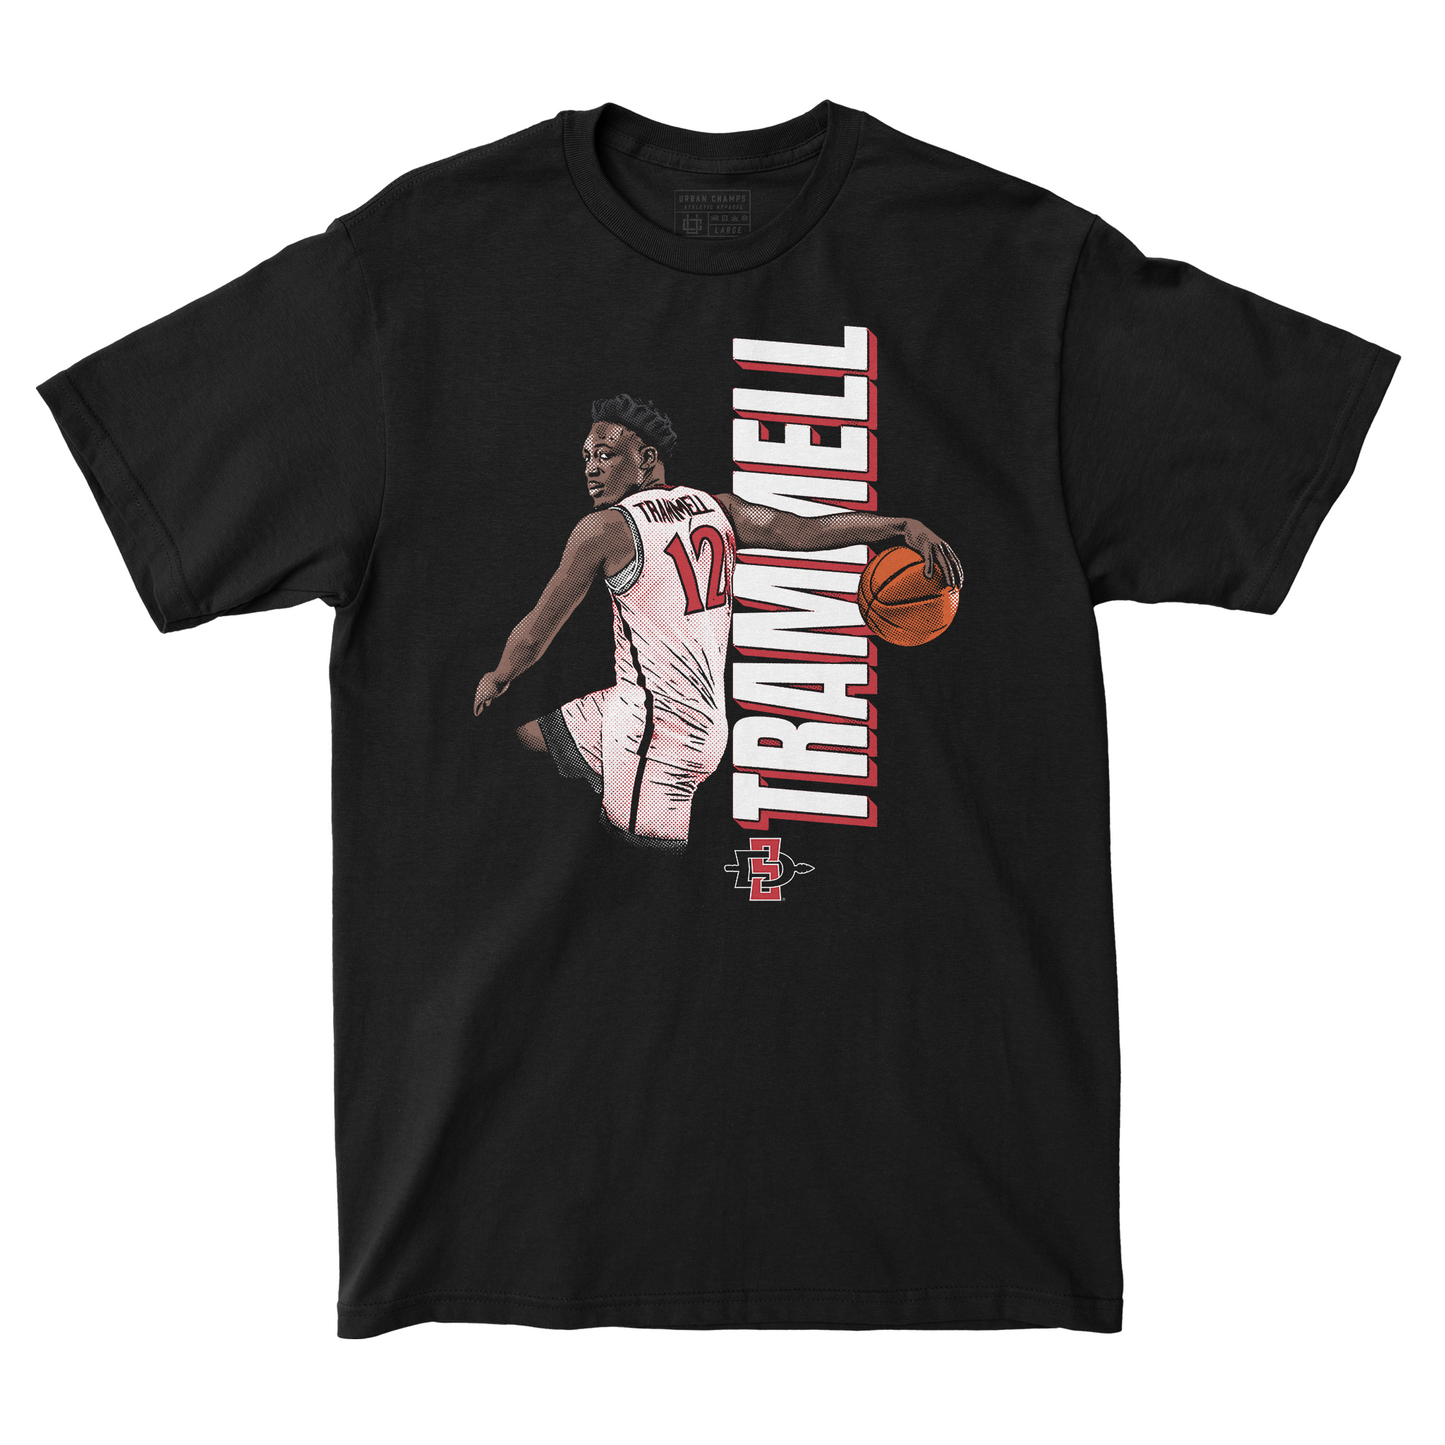 EXCLUSIVE RELEASE: Darrion Trammell Tee